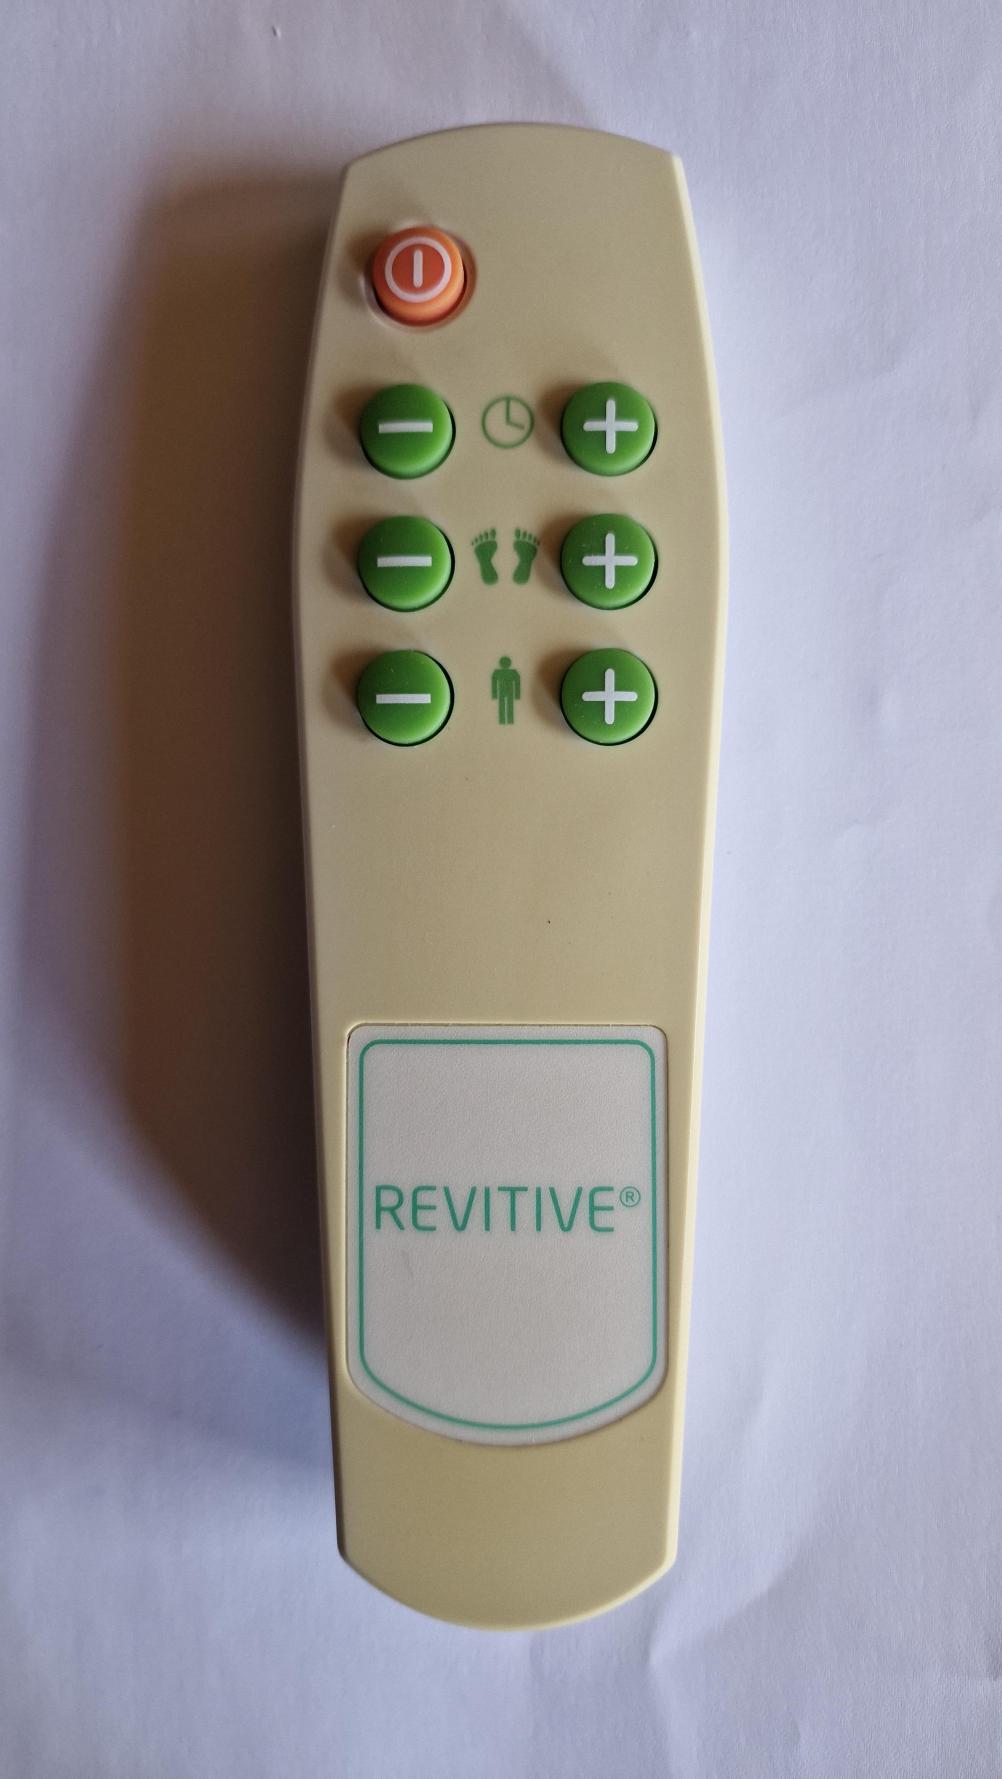 Revitive Foot Massager Remote Control - Front Image